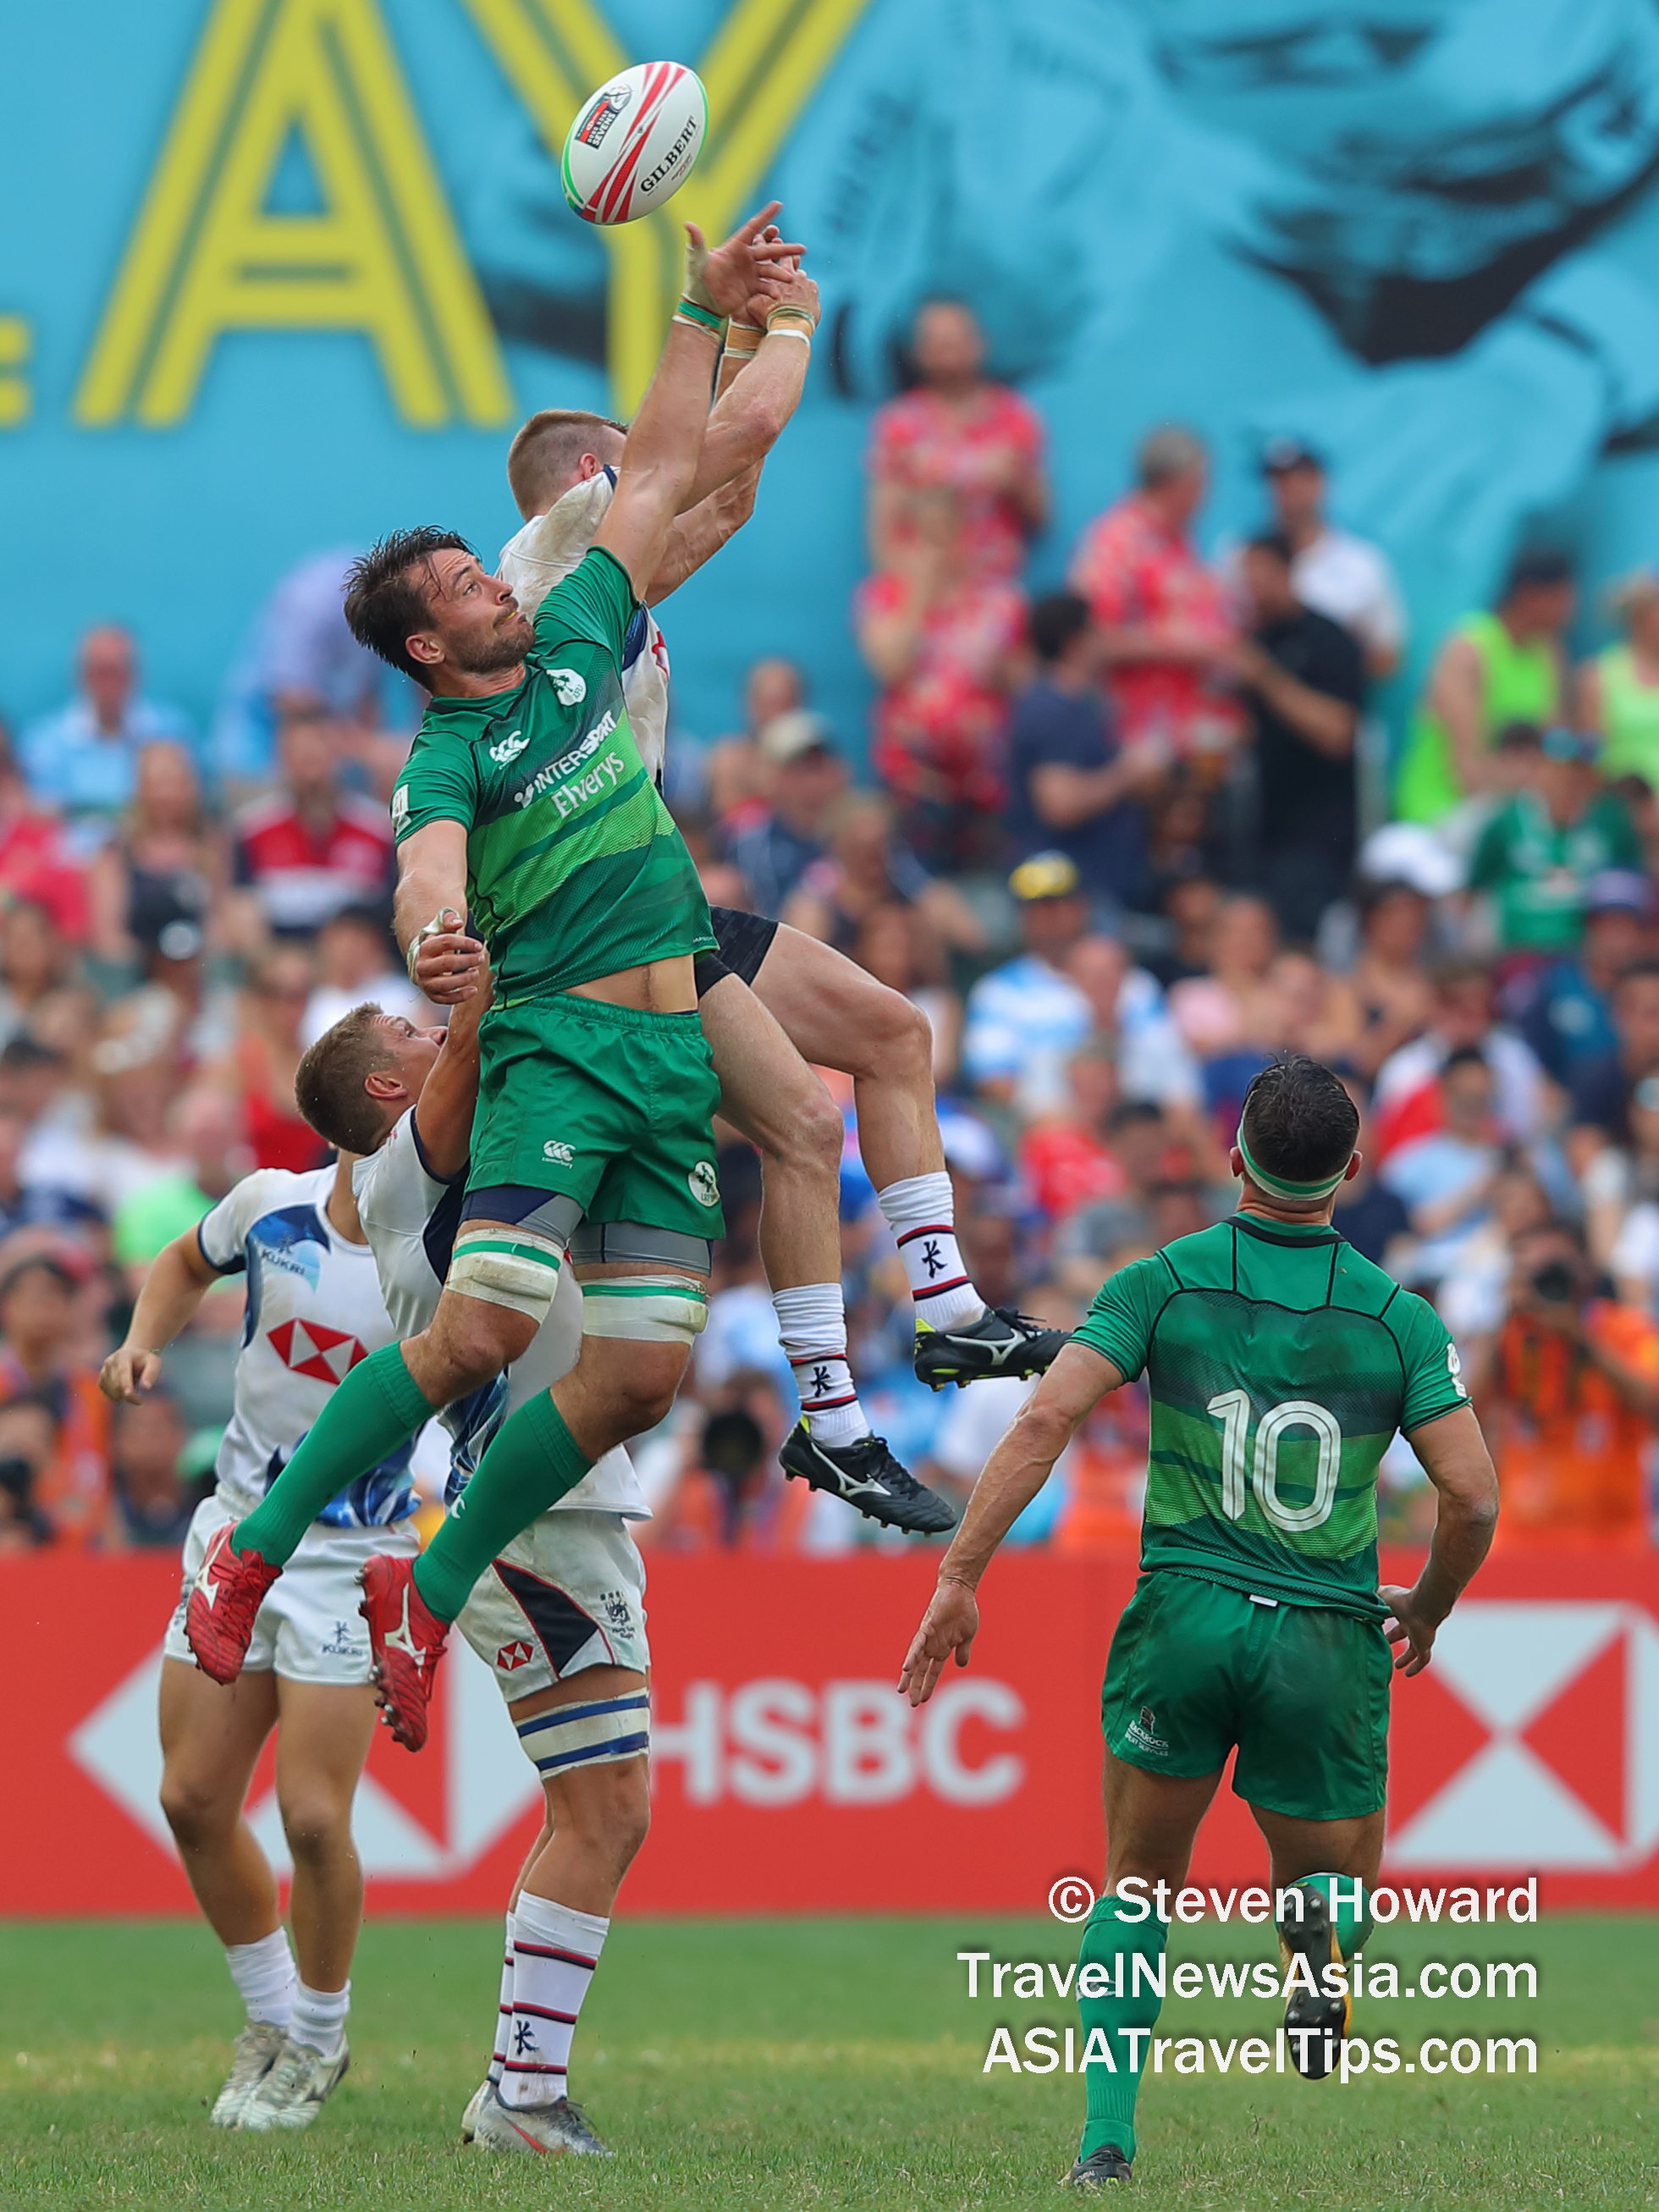 Ireland played magnificently to clinch their place on the 2020 series with victory over hosts Hong Kong on Sunday. Picture by Steven Howard of TravelNewsAsia.com Click to enlarge.